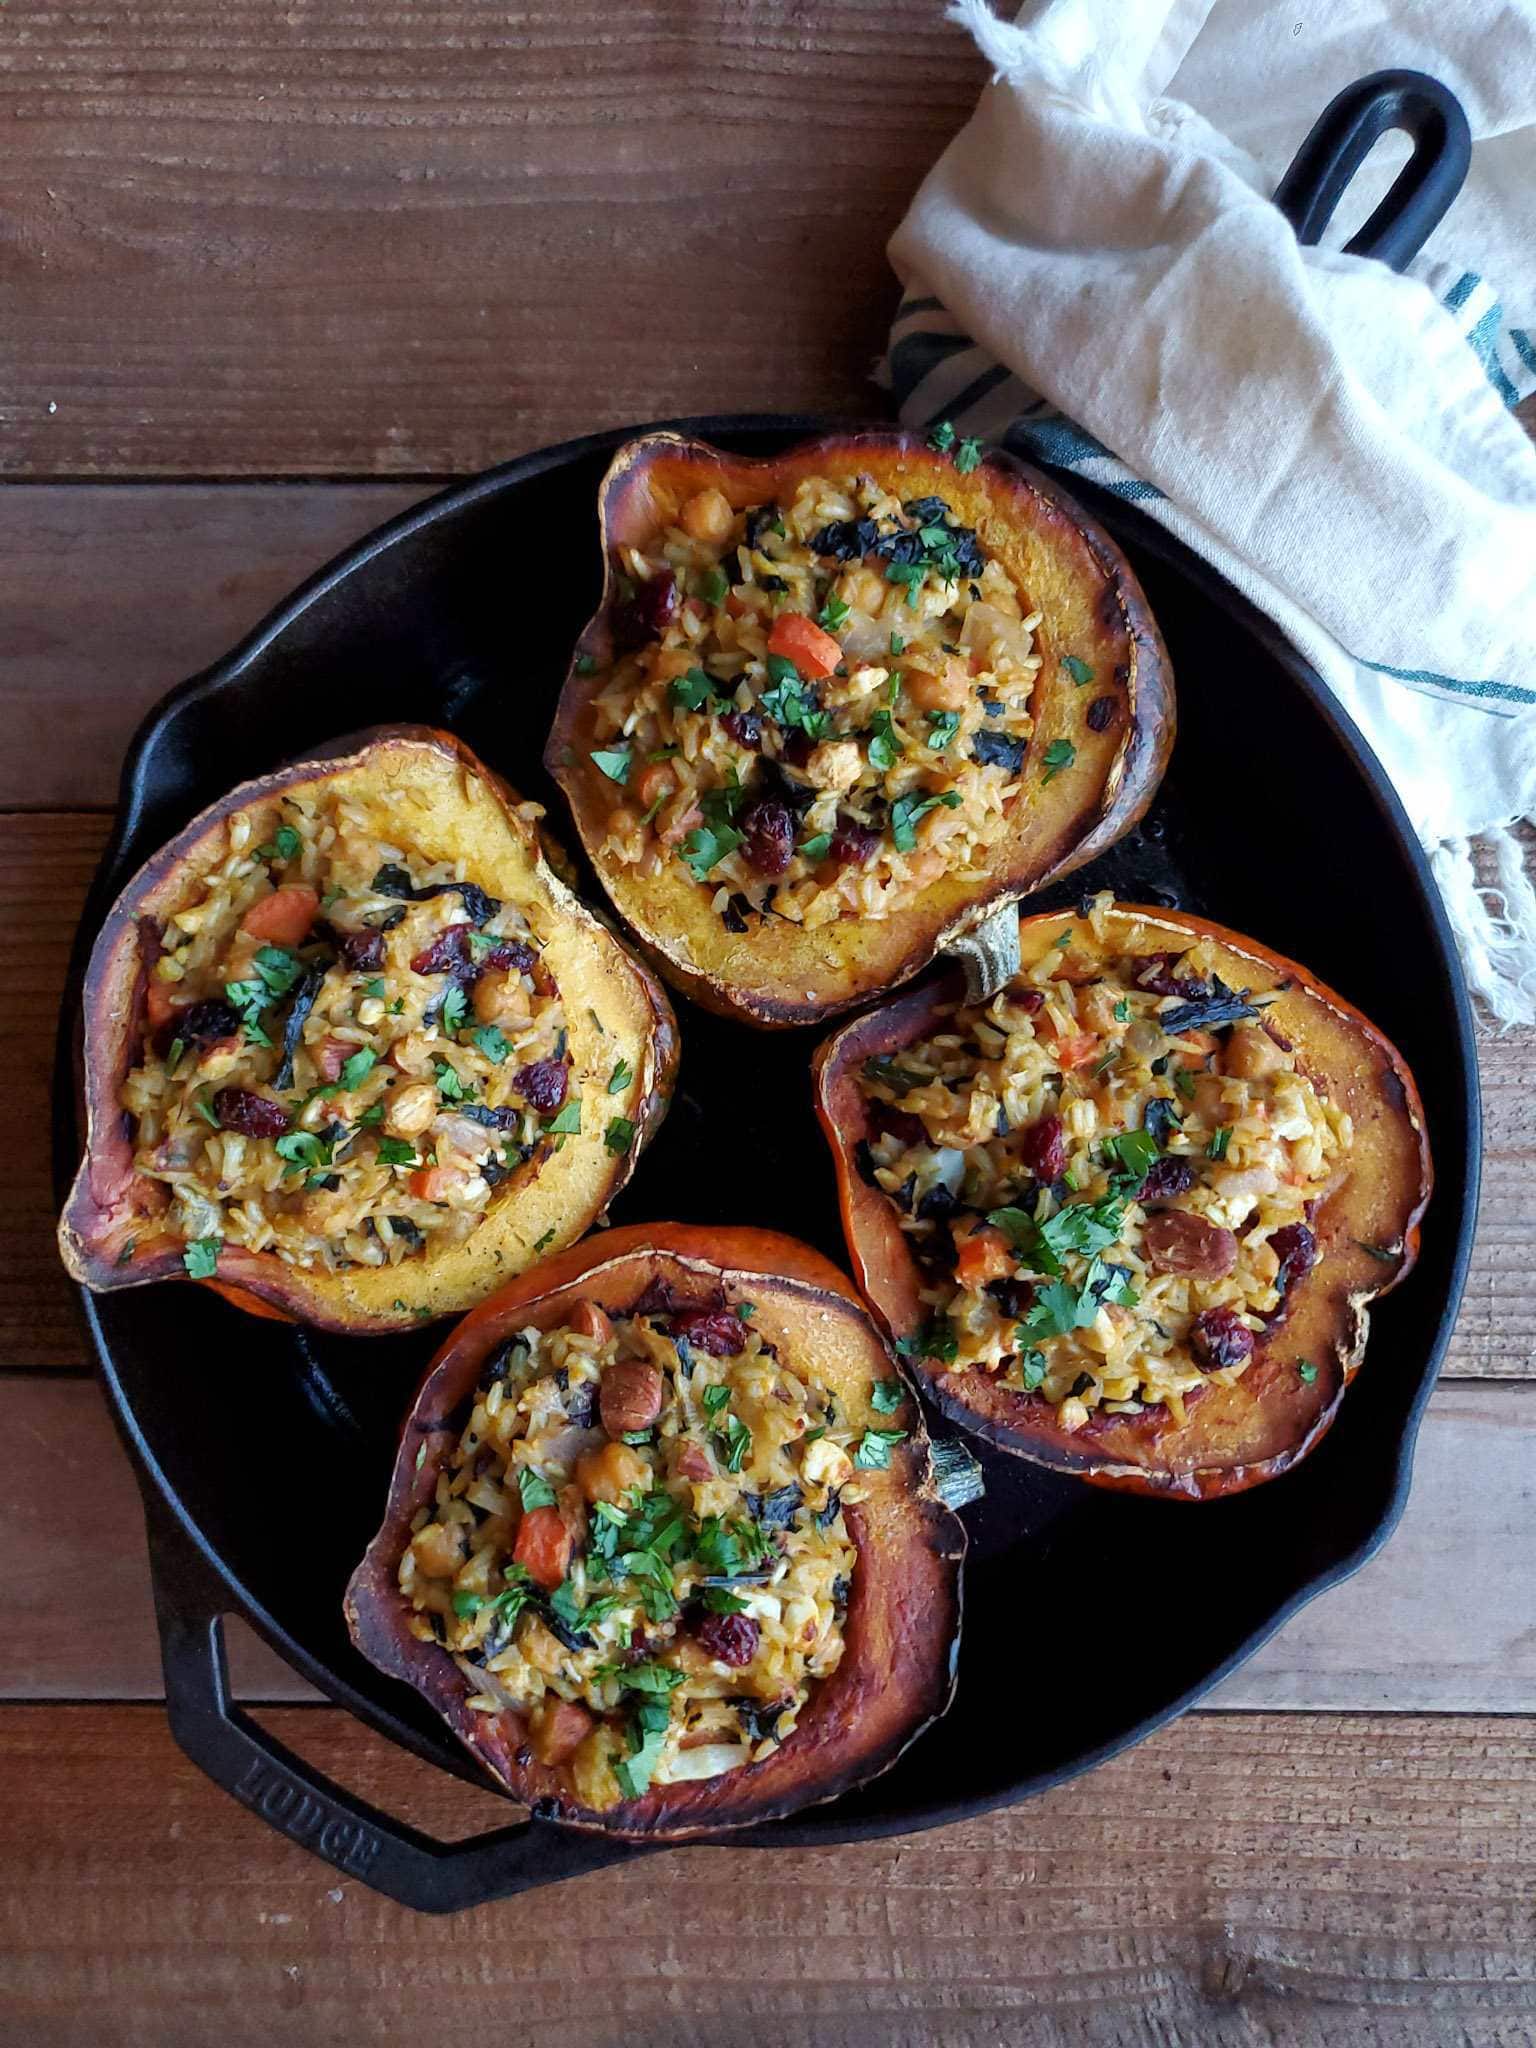 Four halves of biryani stuffed squash sitting in a cast iron pan after it has be baked in the oven. Each squash half is garnished with cilantro, while the dried fruit, nuts, and garbanzo beans are visible amongst the rice stuffing. 